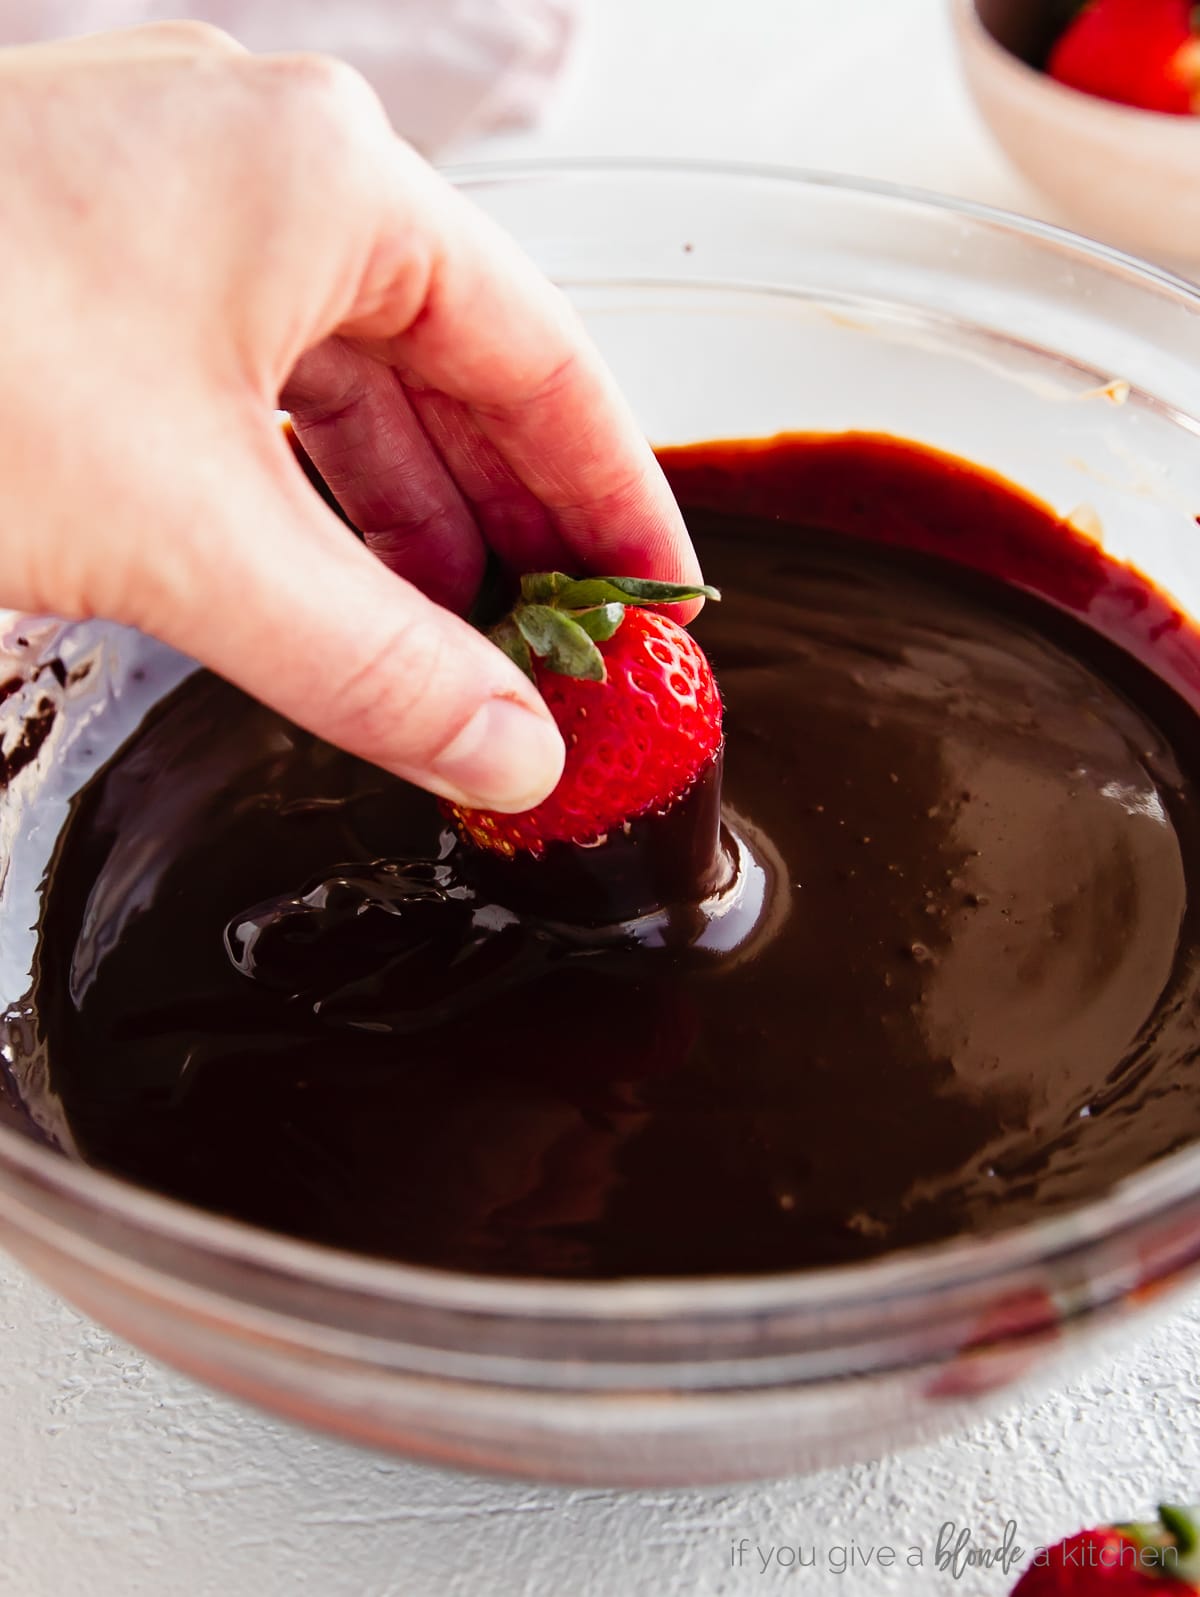 hand dipping strawberry in bowl of chocolate ganache